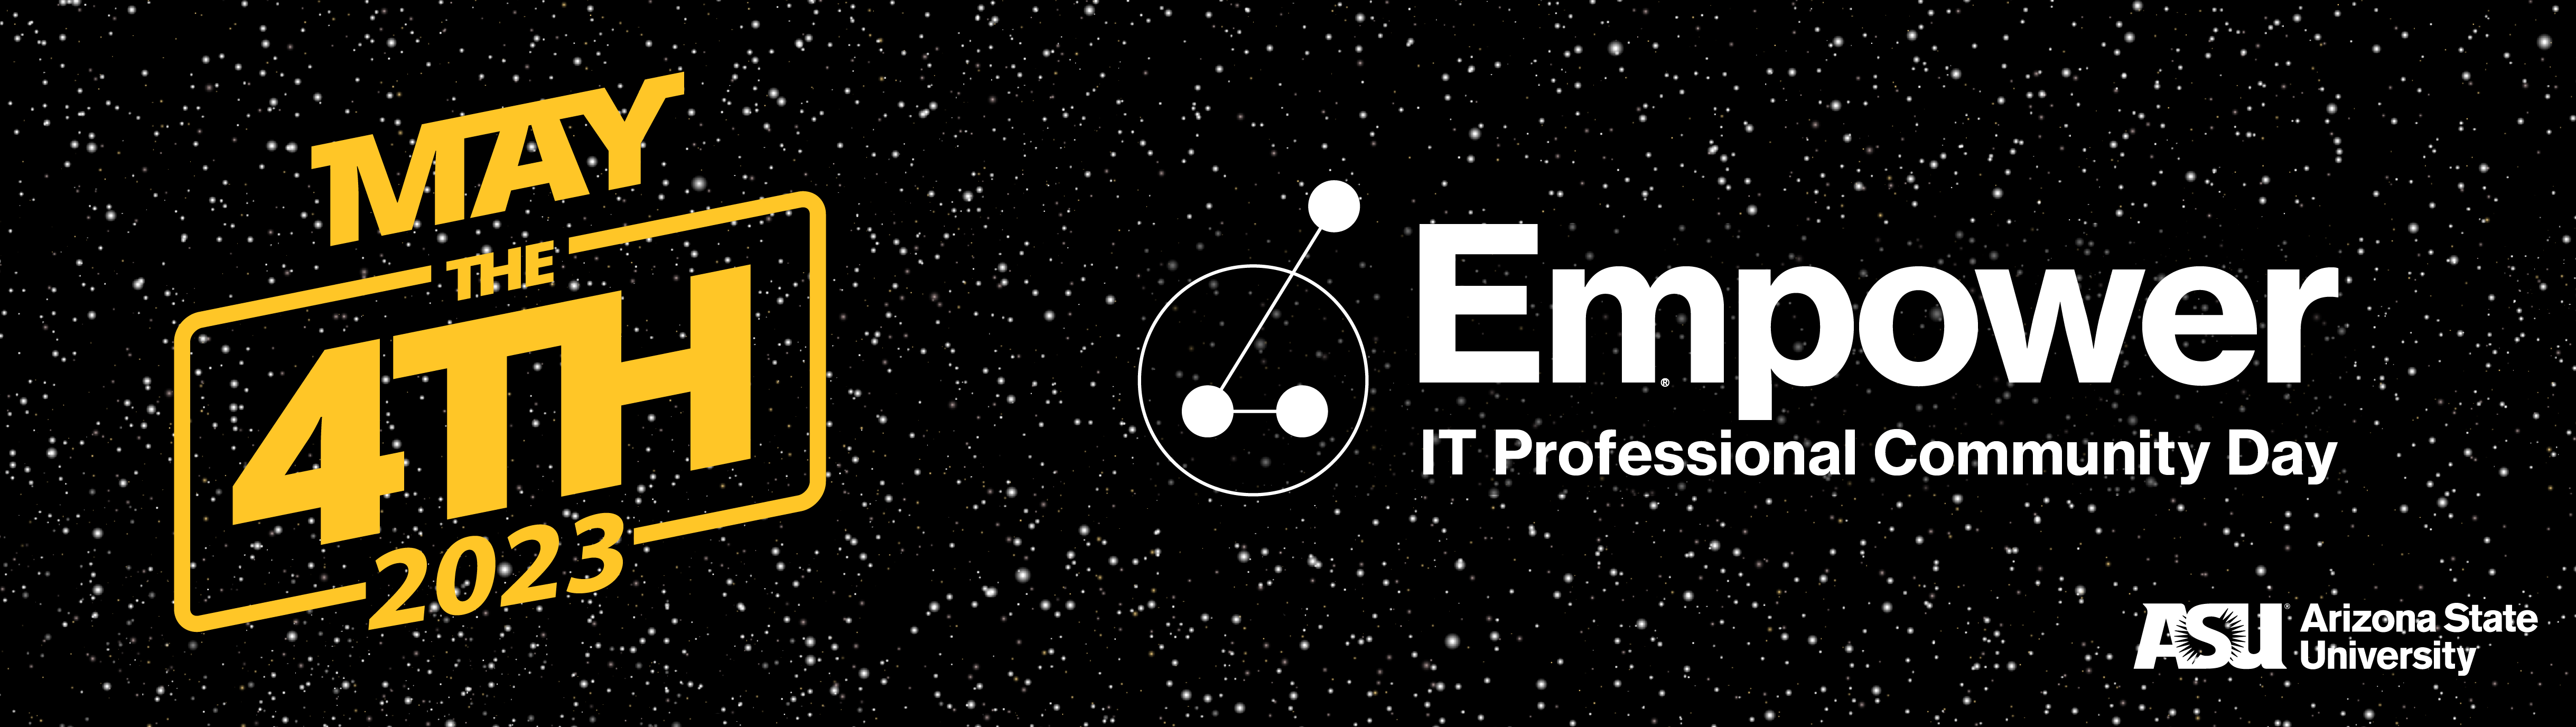 May the 4th Empower IT Professional Community Day